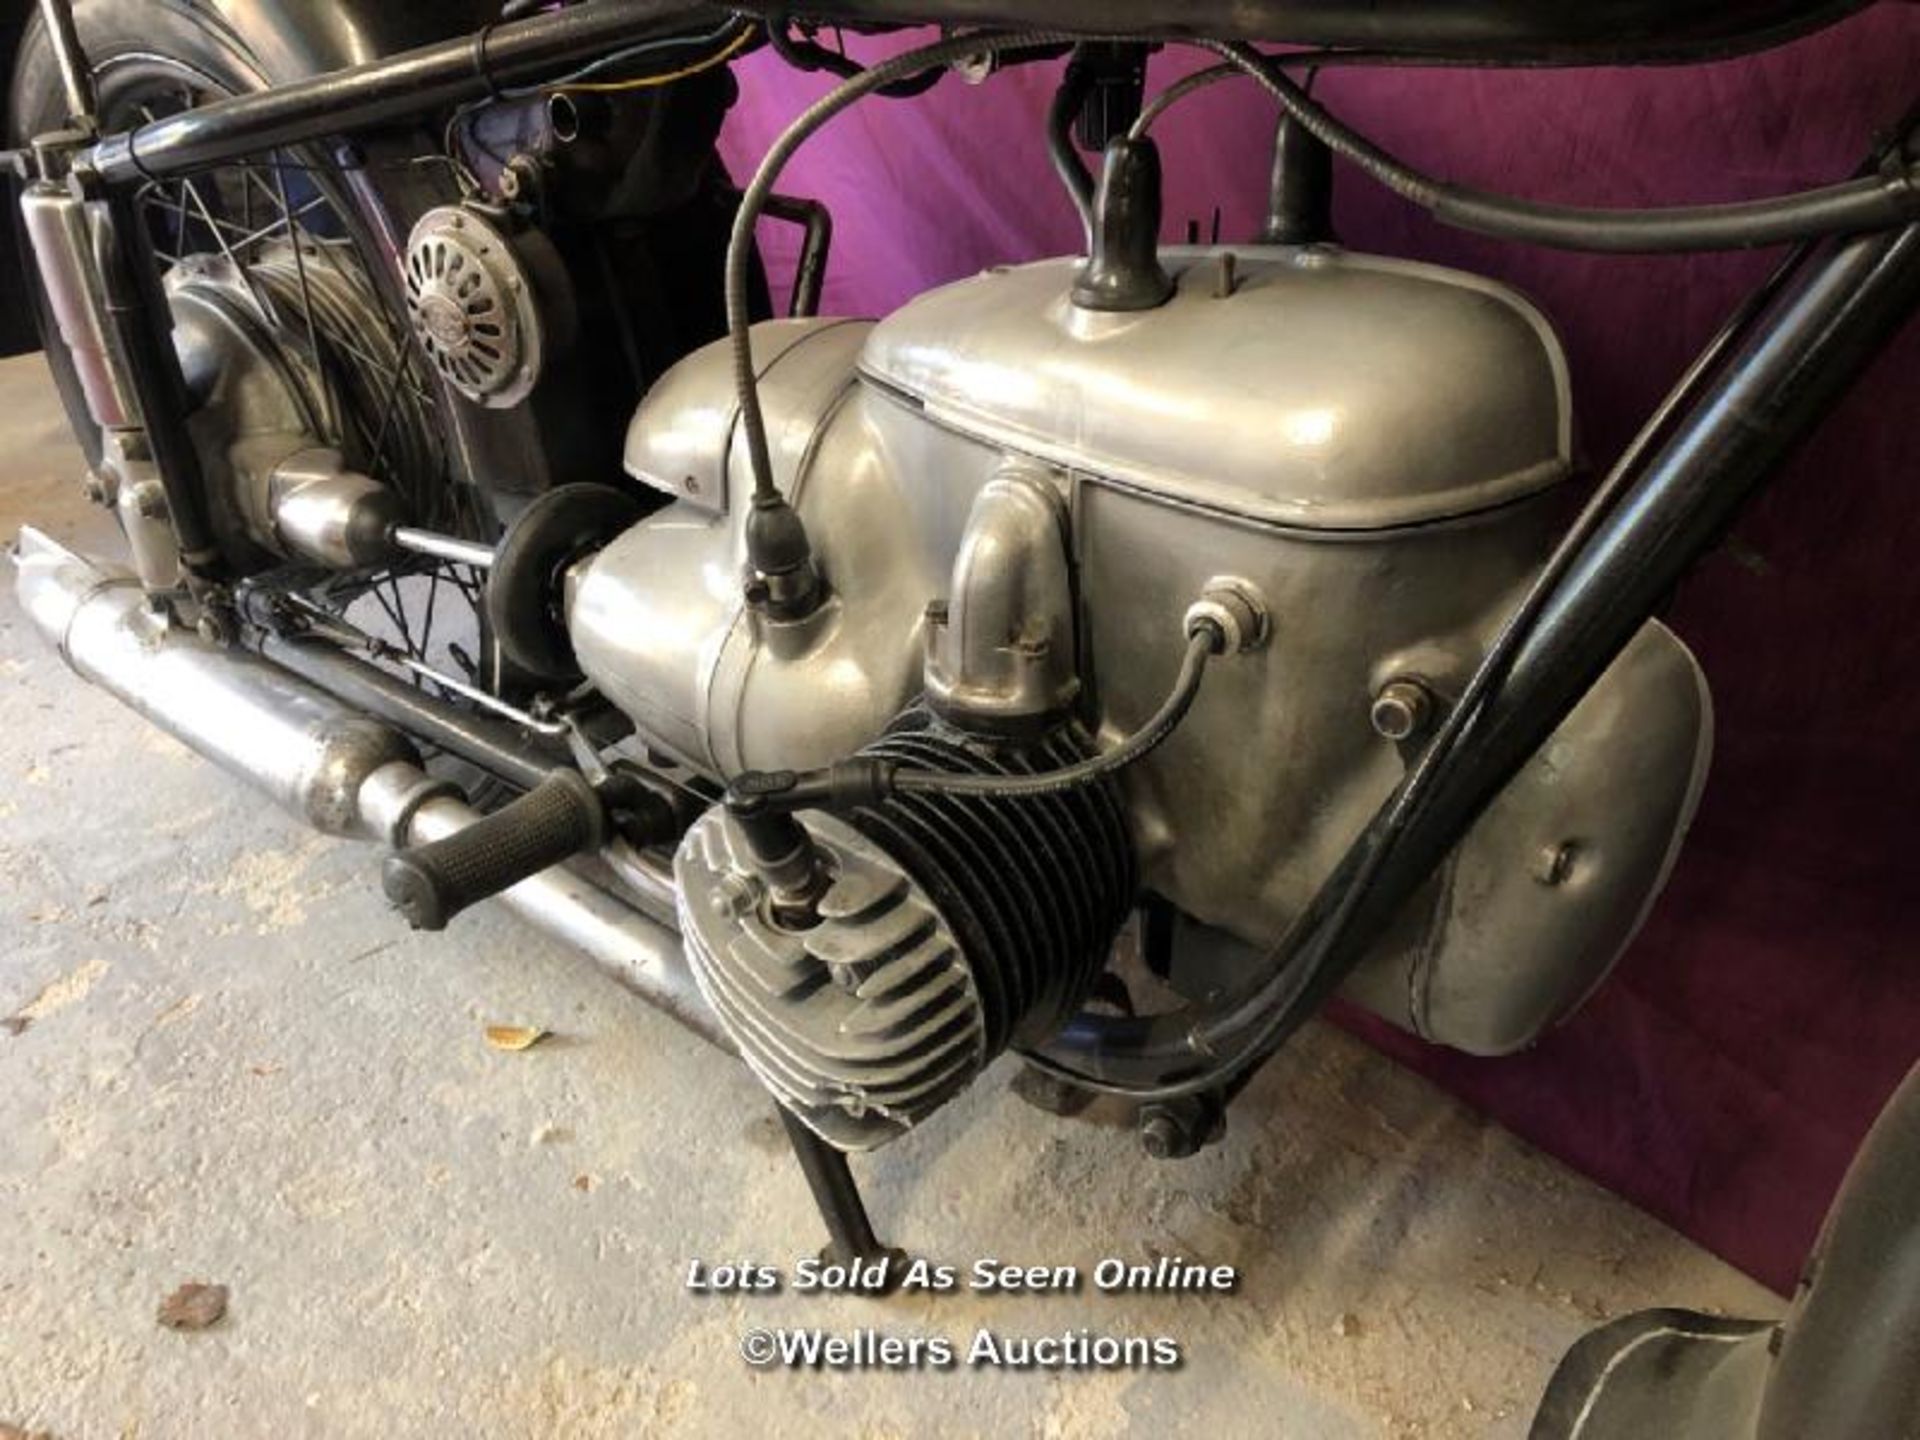 IFA 350 HORIZONTALLY OPPOSED TWIN CYLINDER 1954 MOTORCYCLE, TAX EXEMPT, RUNS WITH GOOD - Image 11 of 12